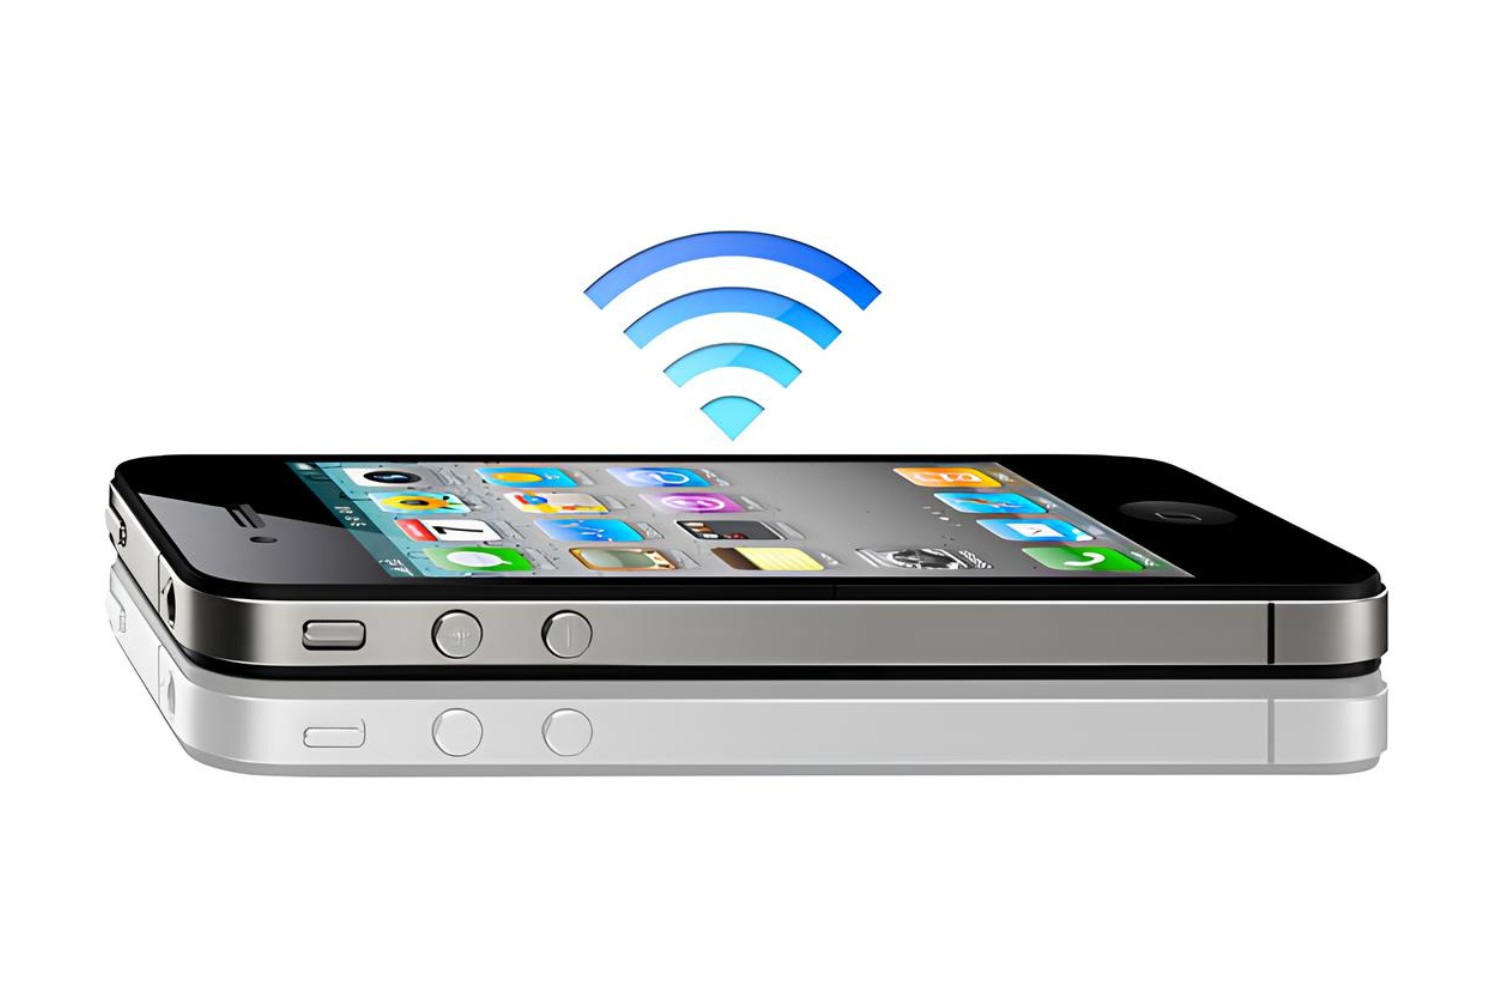 creating-wi-fi-hotspot-with-iphone-4s-user-friendly-guide